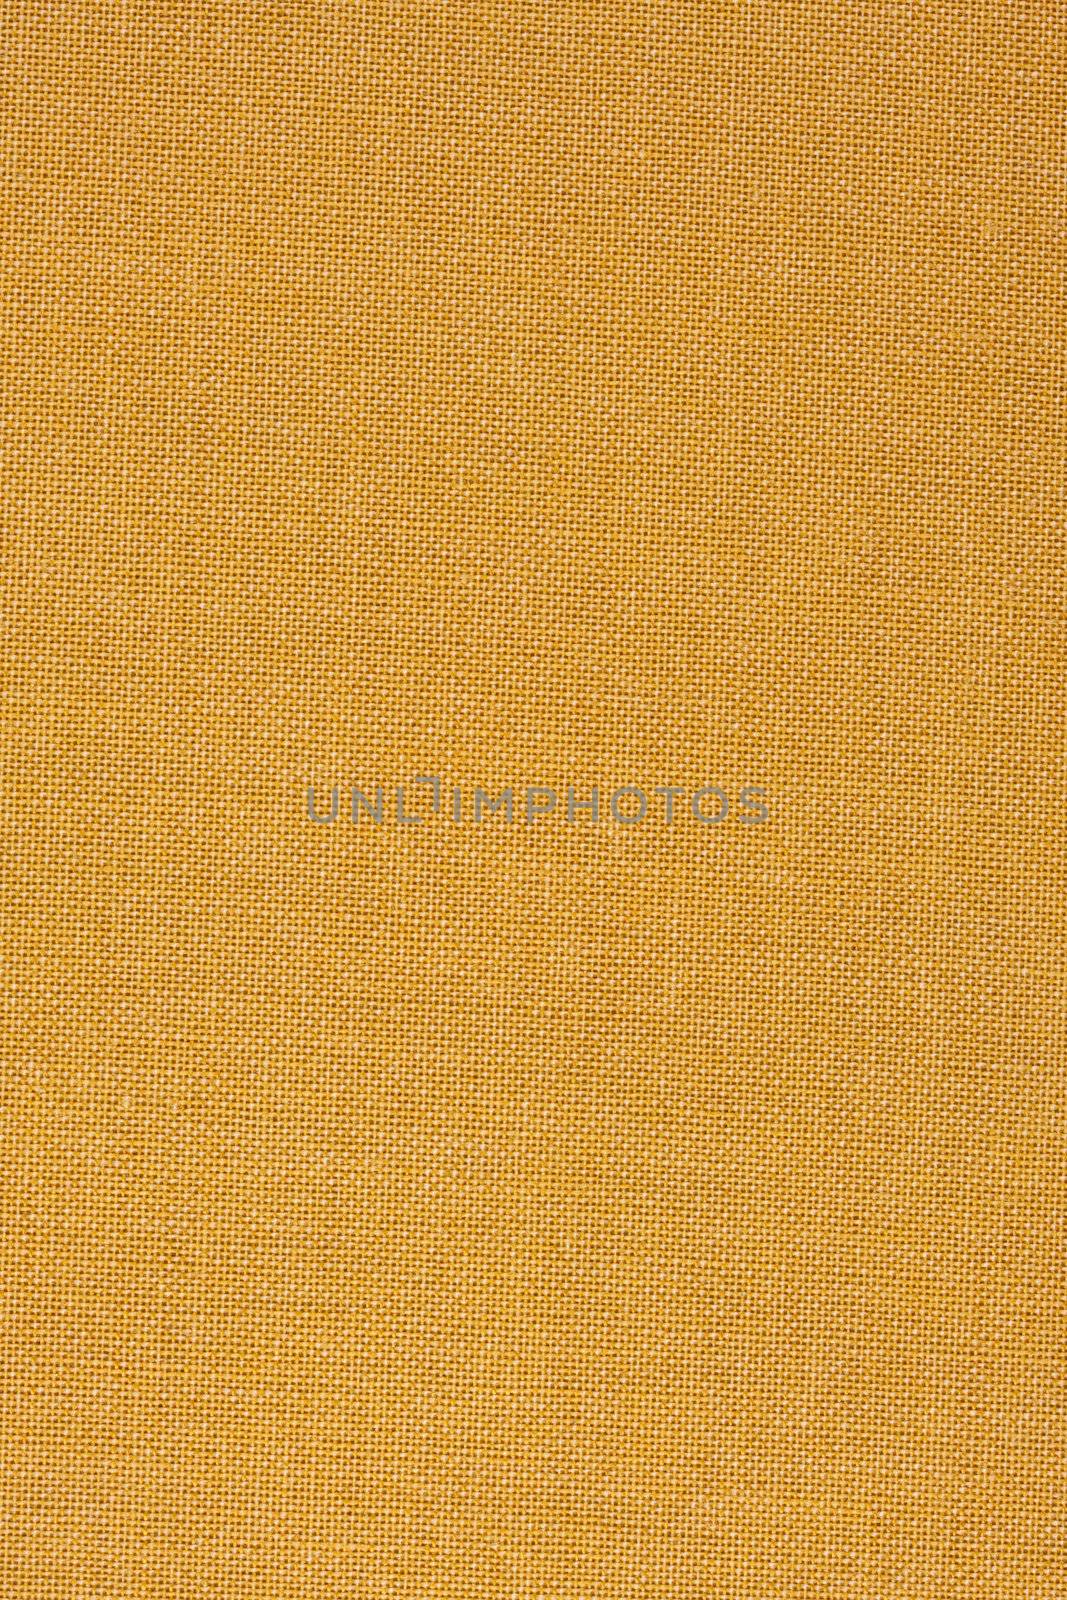 yellow, coarse textile background from a vintage 1960s book cover